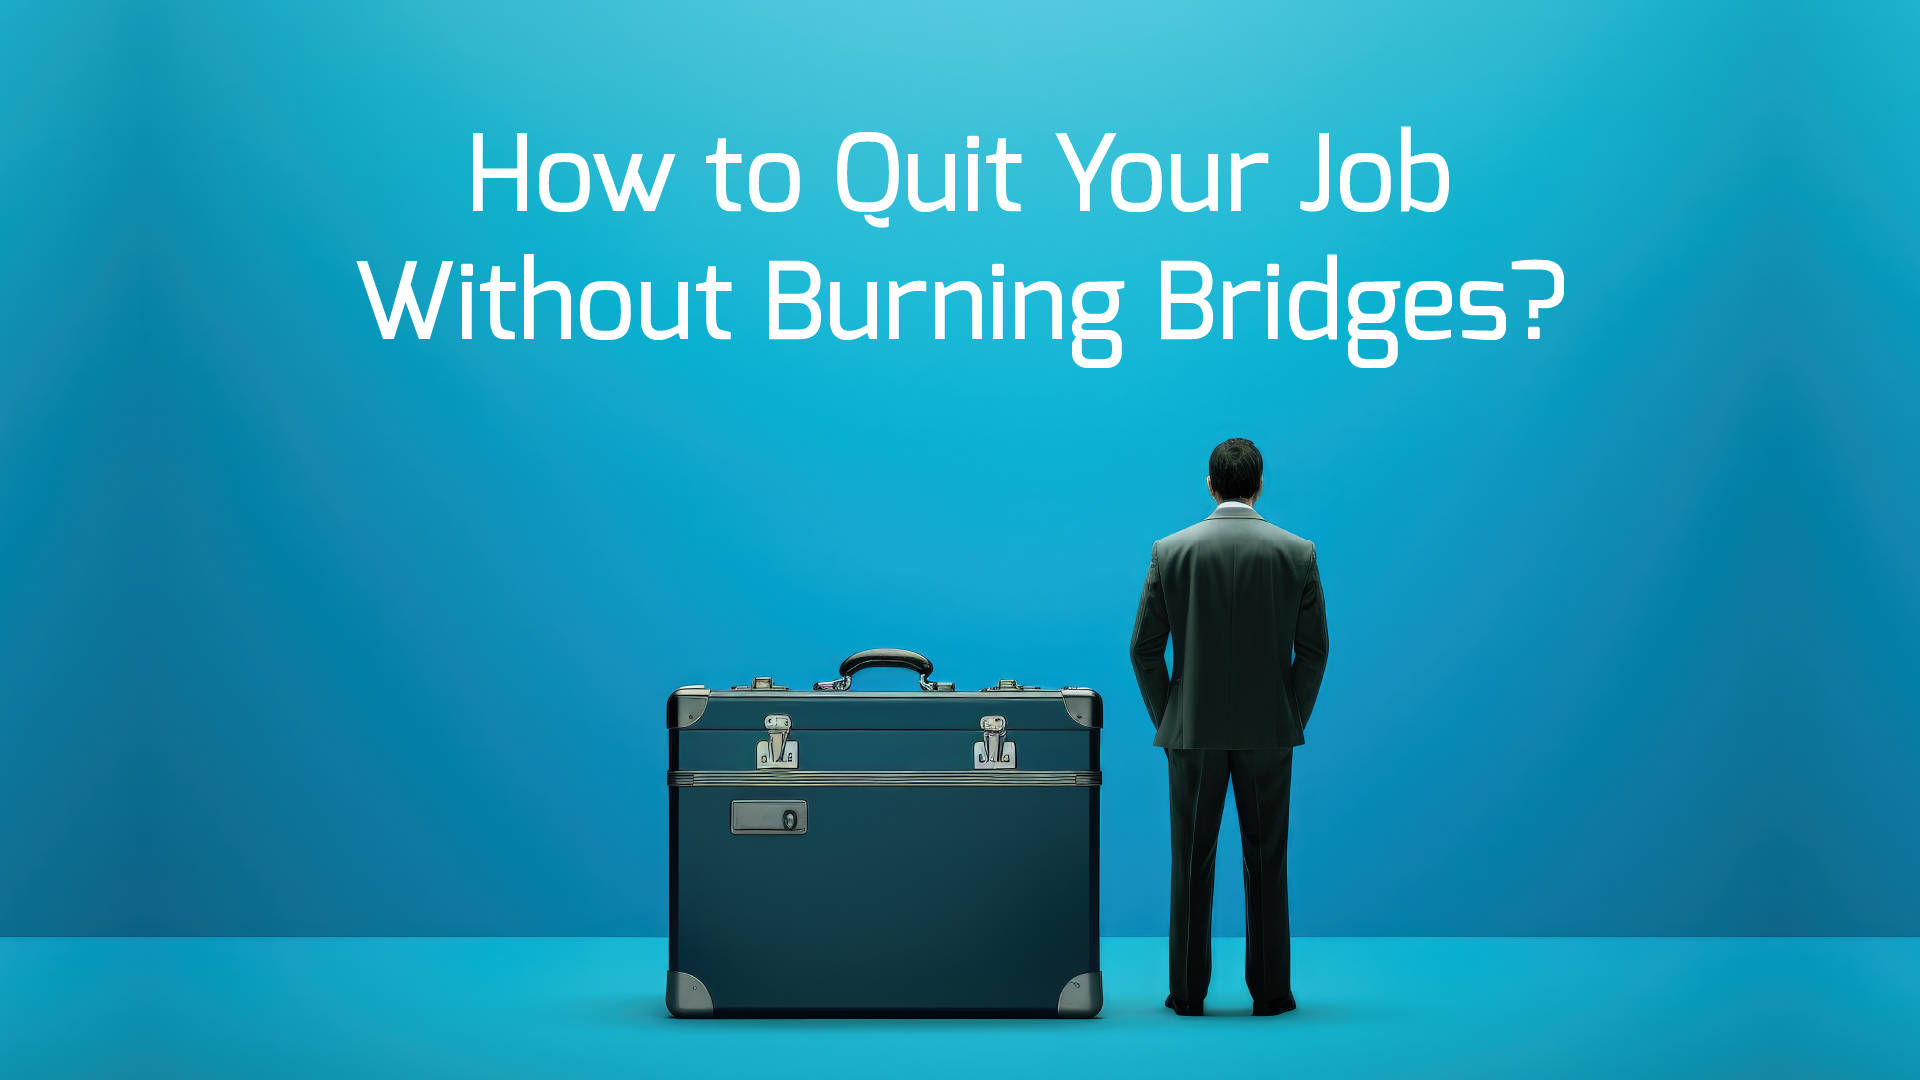 How to Quit Your Job Without Burning Bridges?